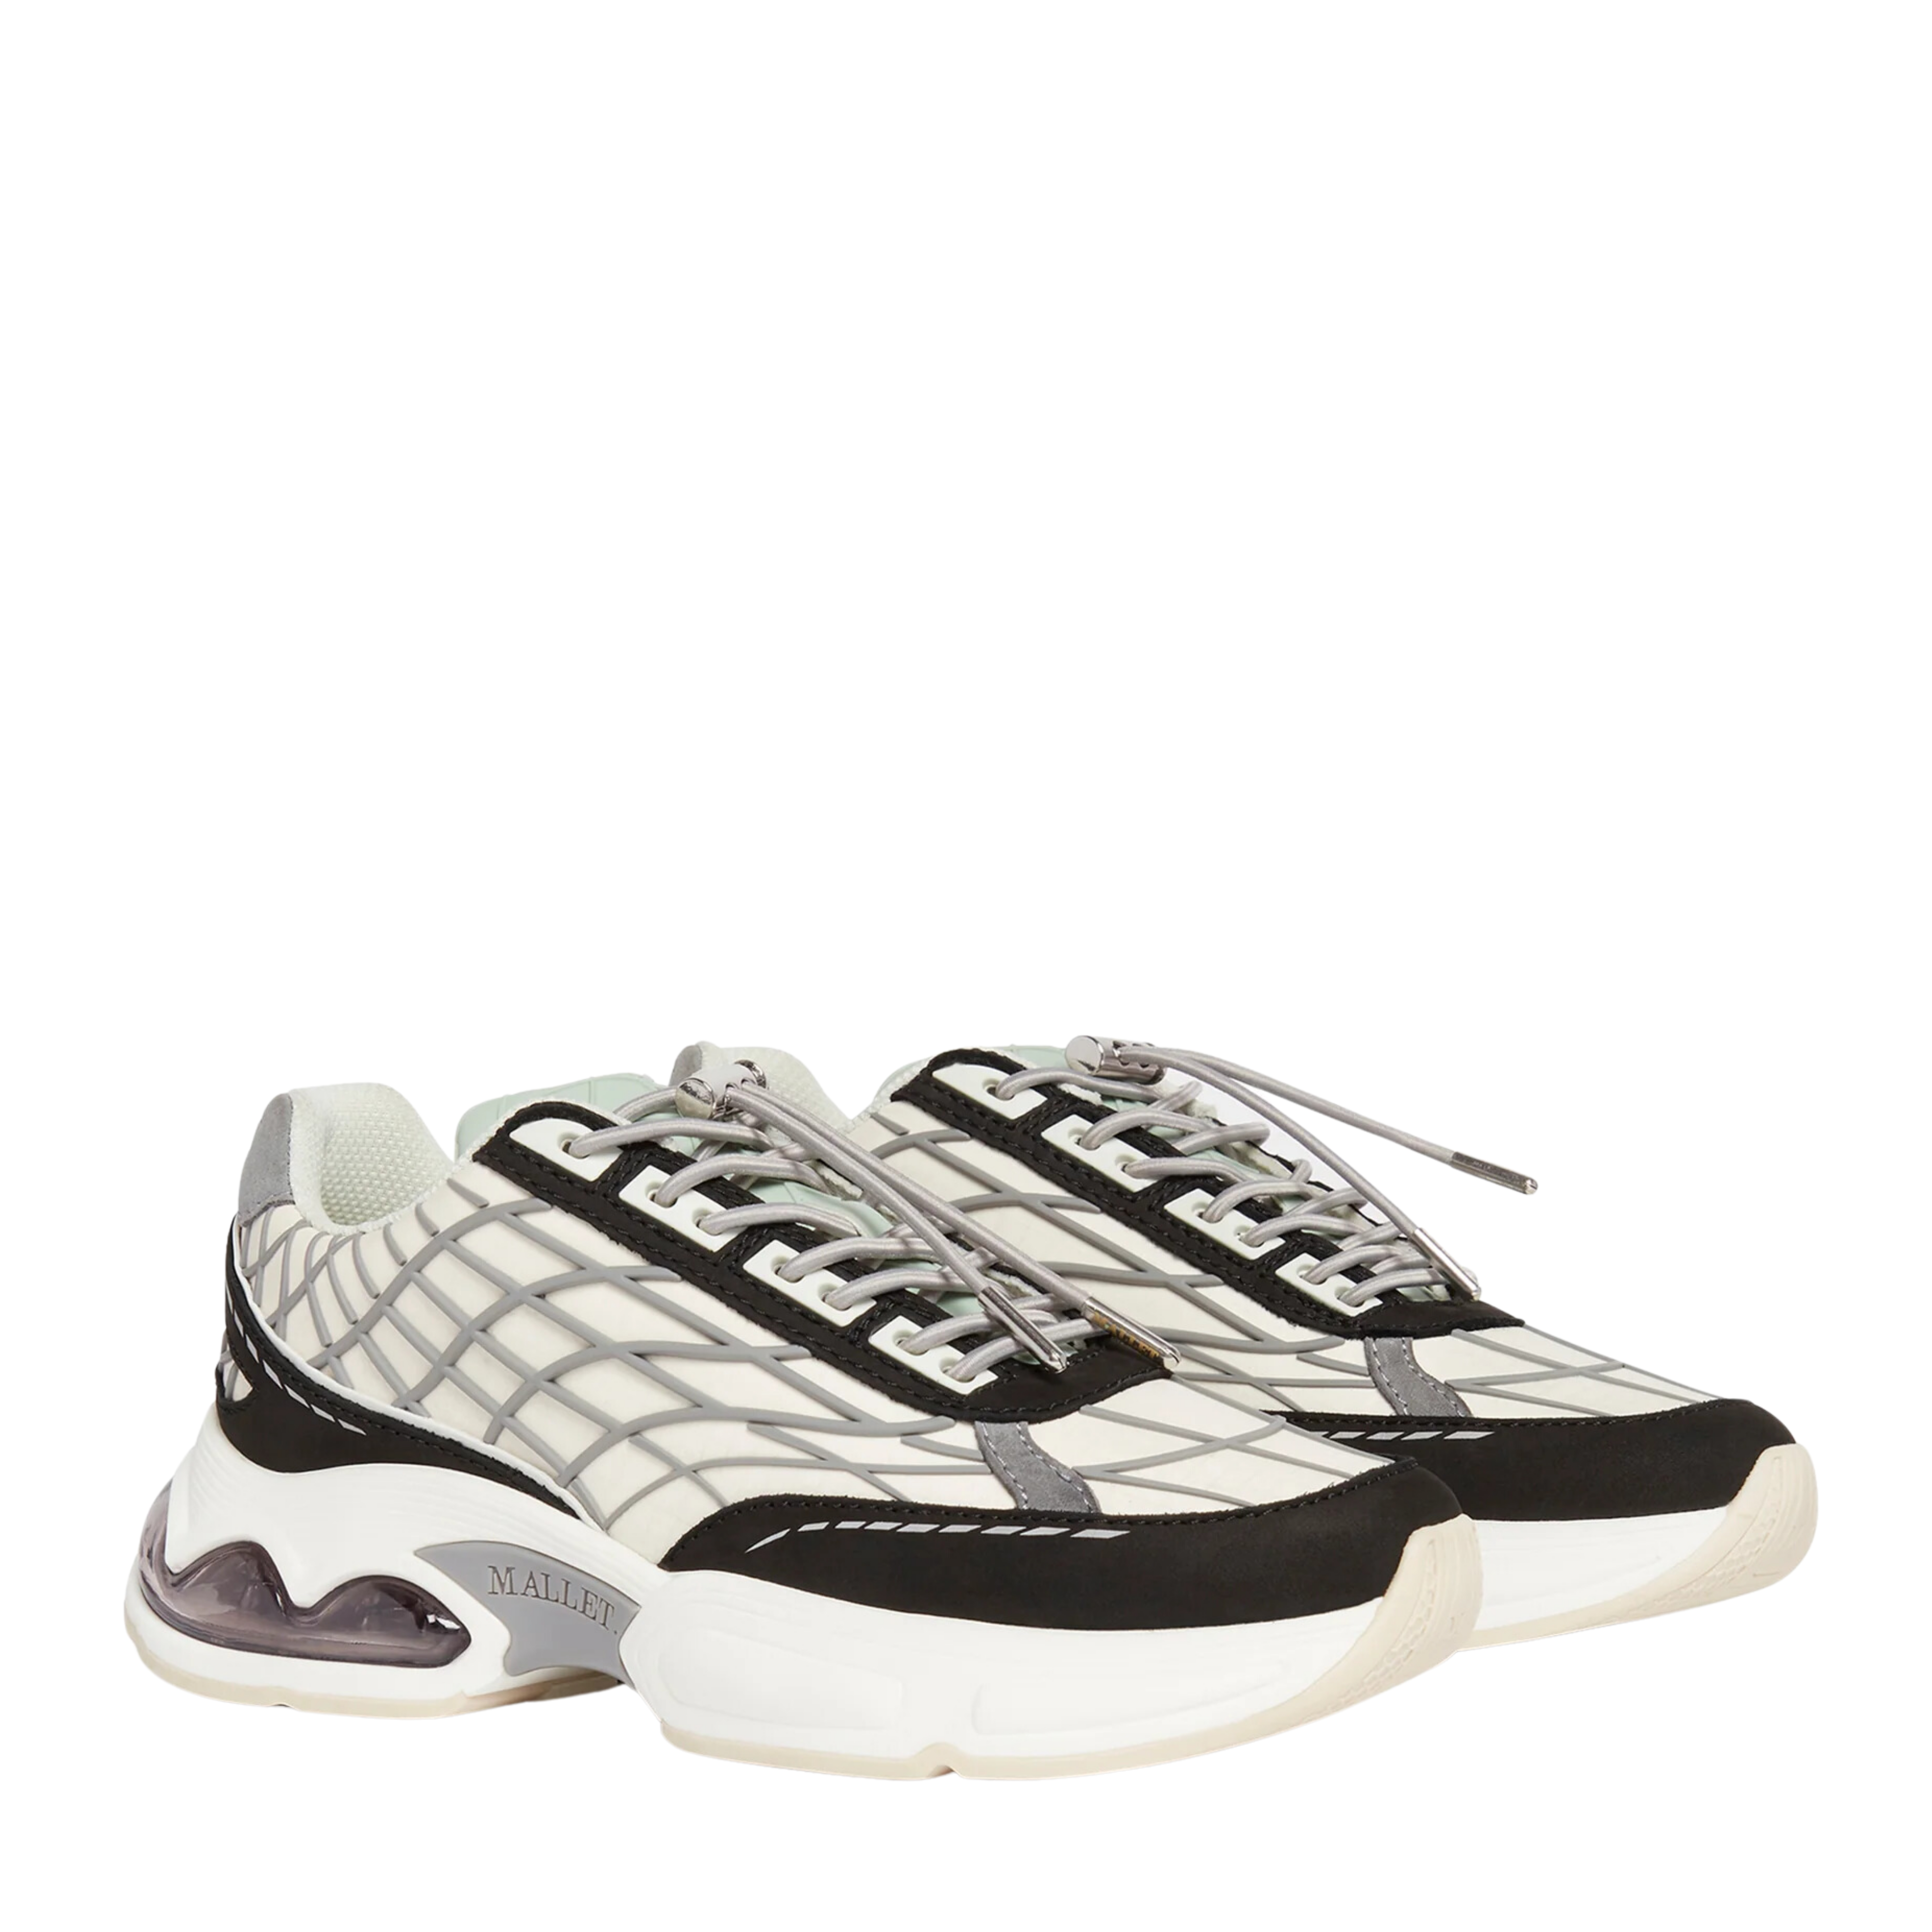 Miss Mallet Neptune Cordlock Off-White Ripstop Trainers